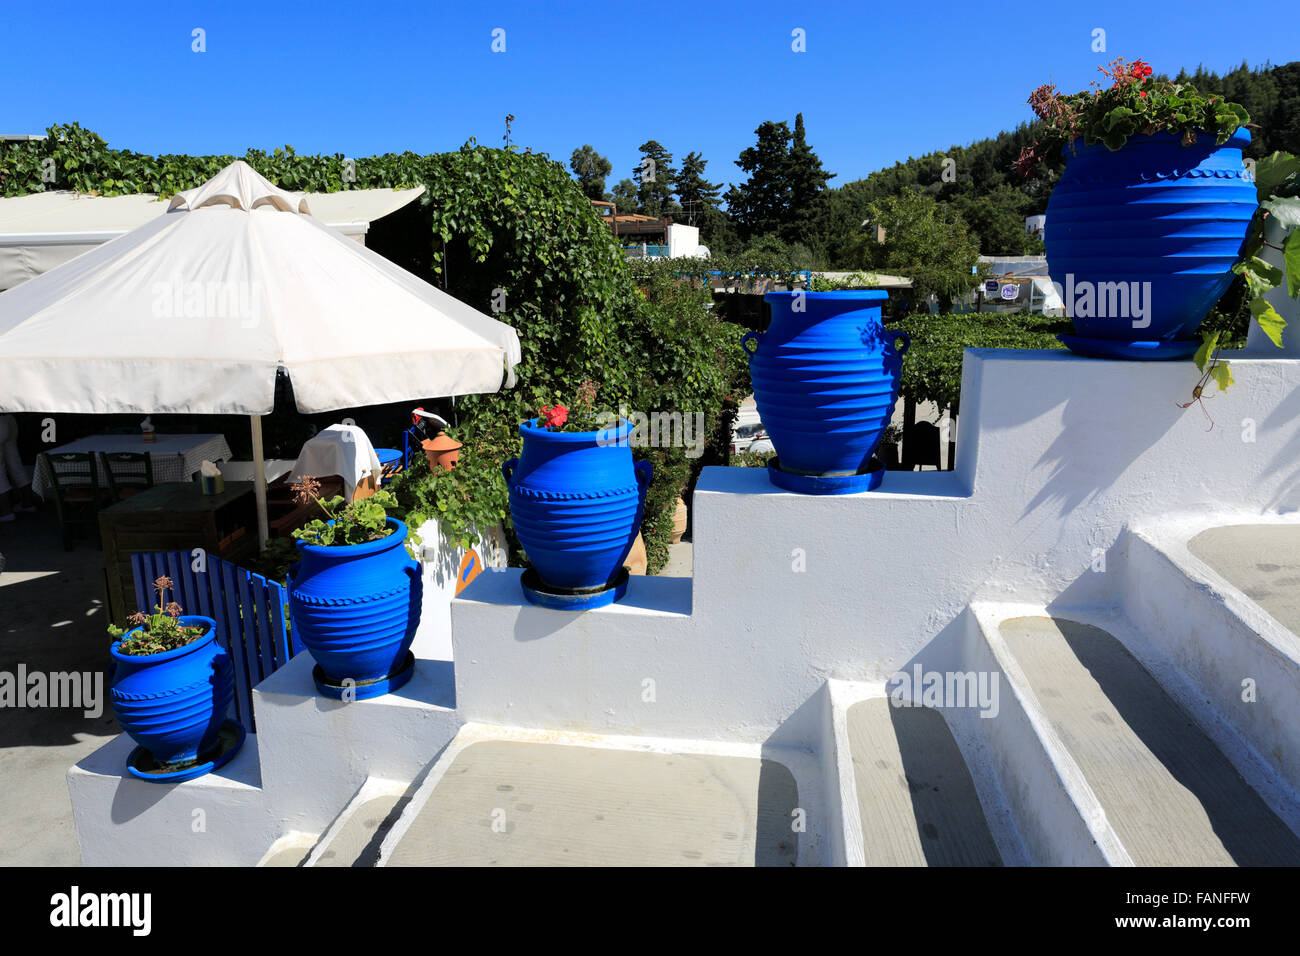 Overview of Zia village, Kos Island, Dodecanese group of islands, South Aegean Sea, Greece. Stock Photo